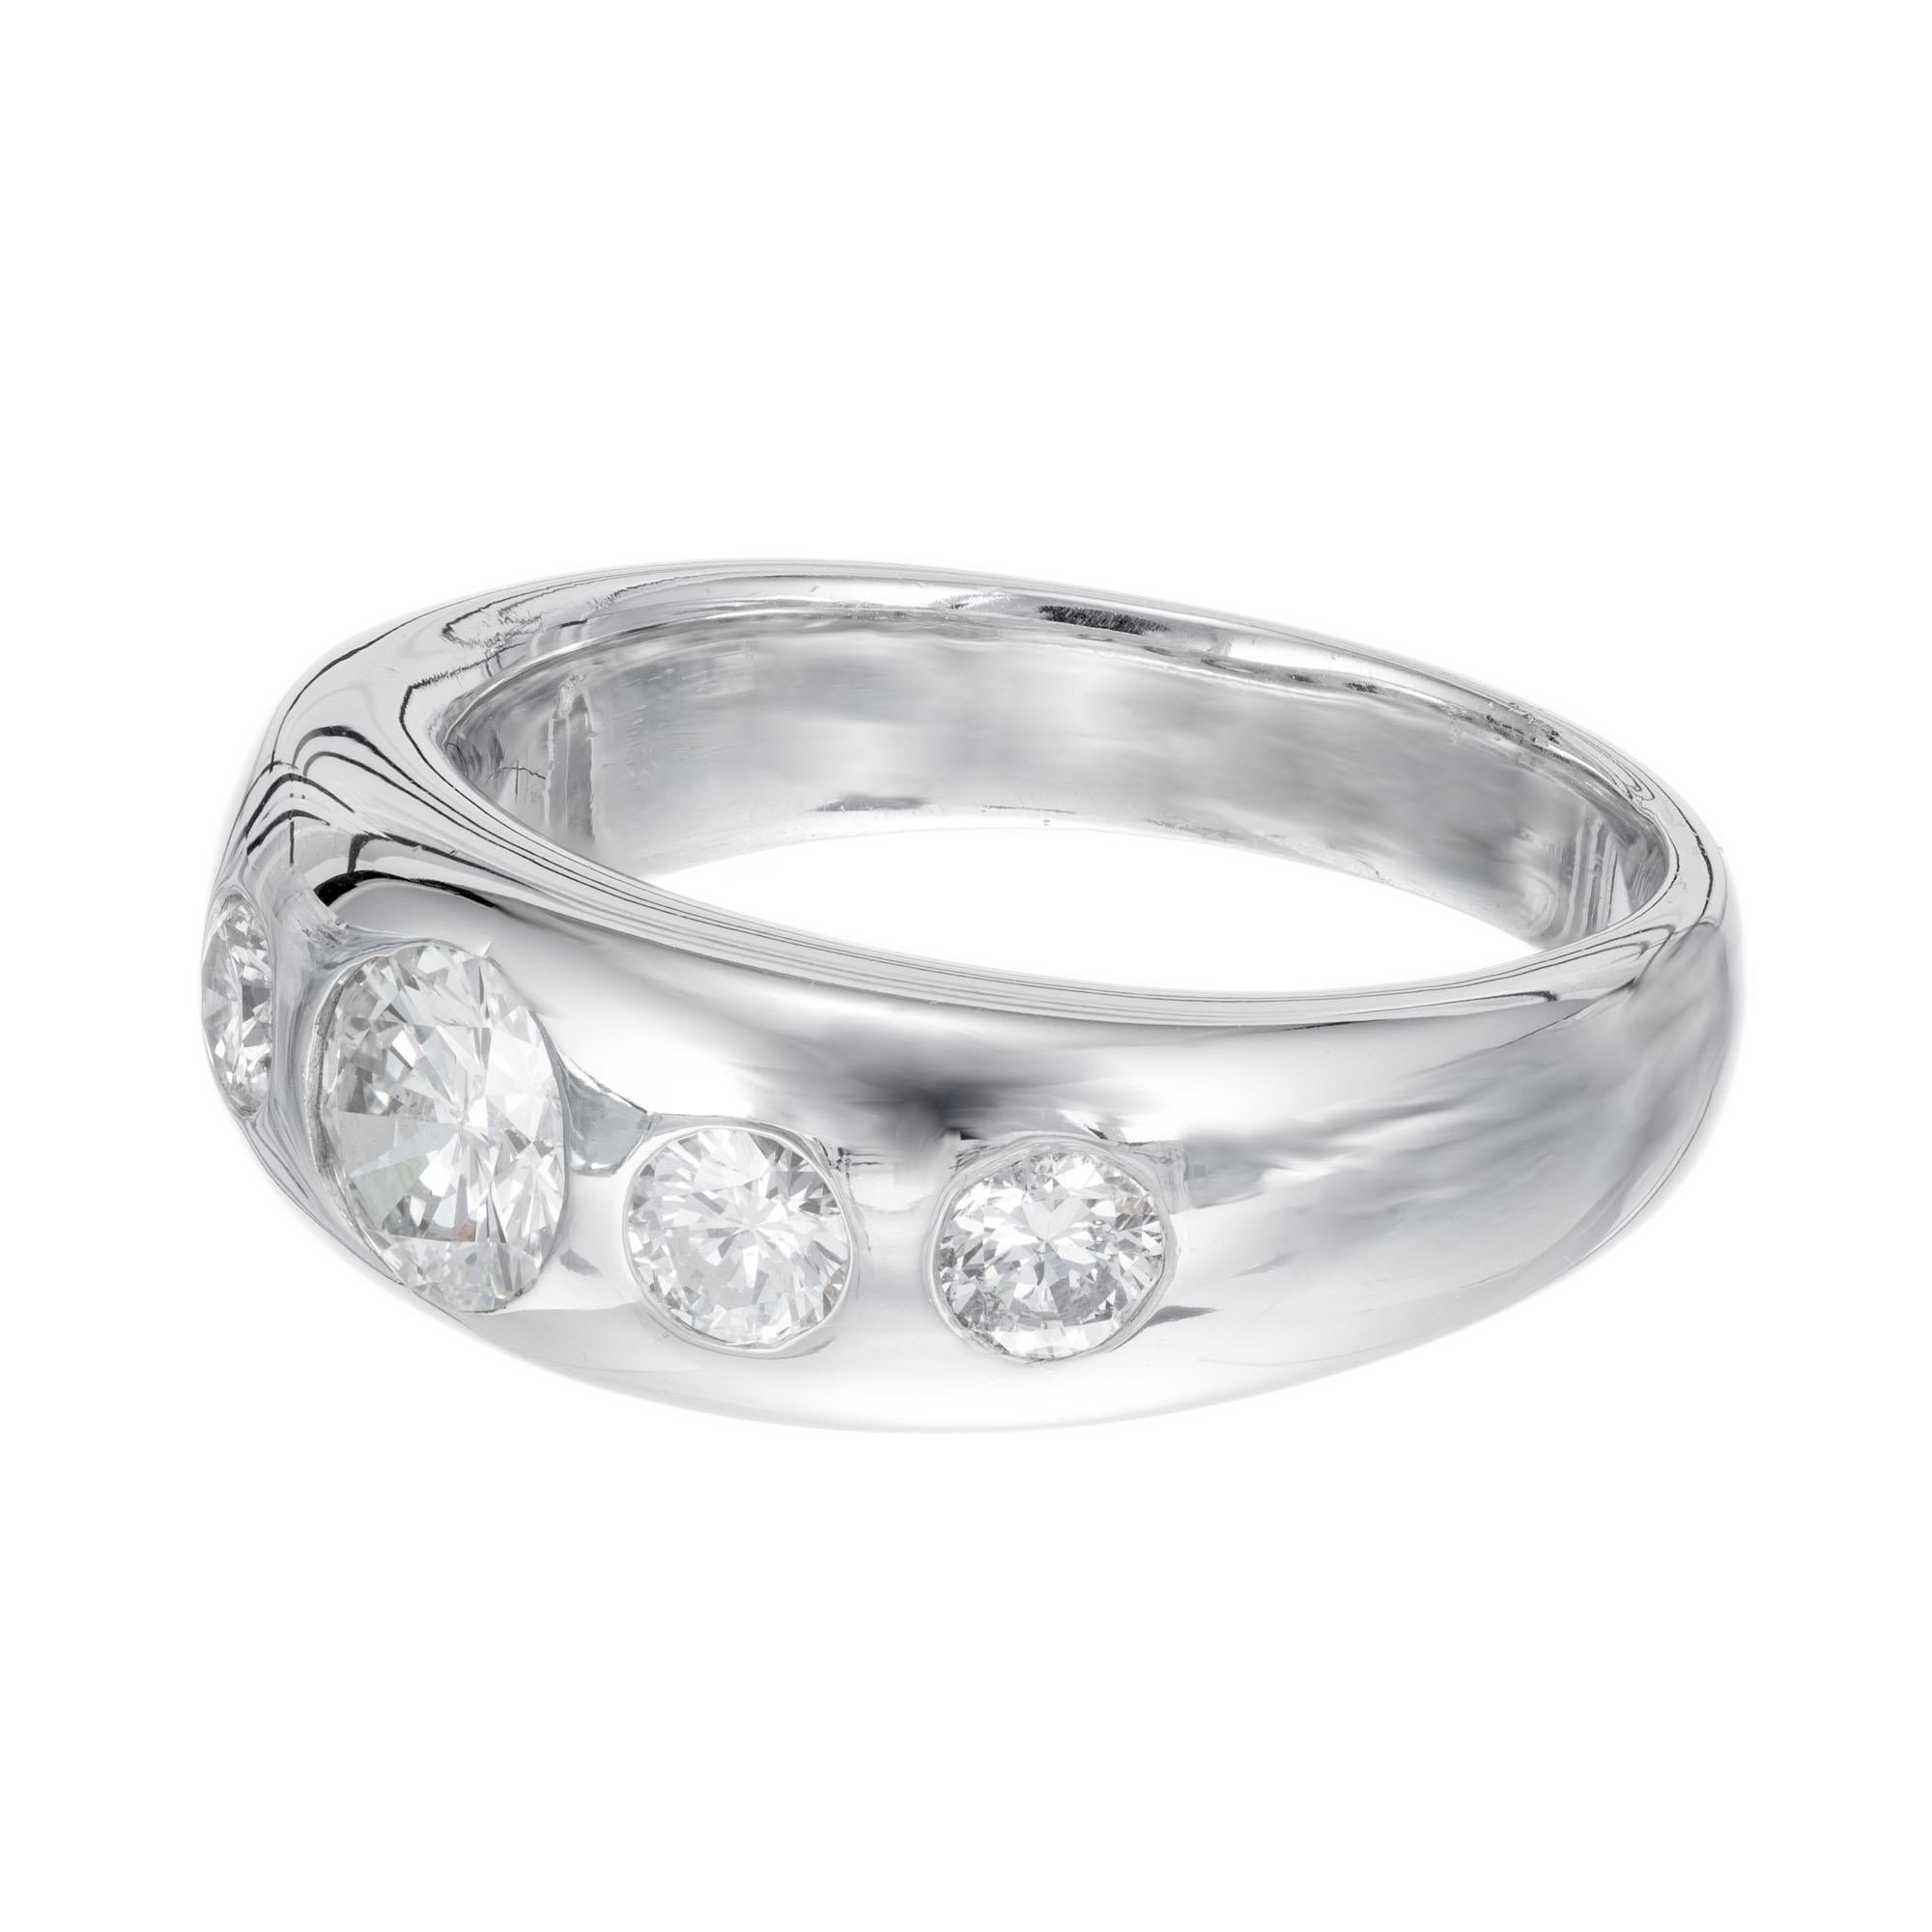 1.04 Carat Round Diamond Platinum Gypsy Style Band Ring For Sale 1